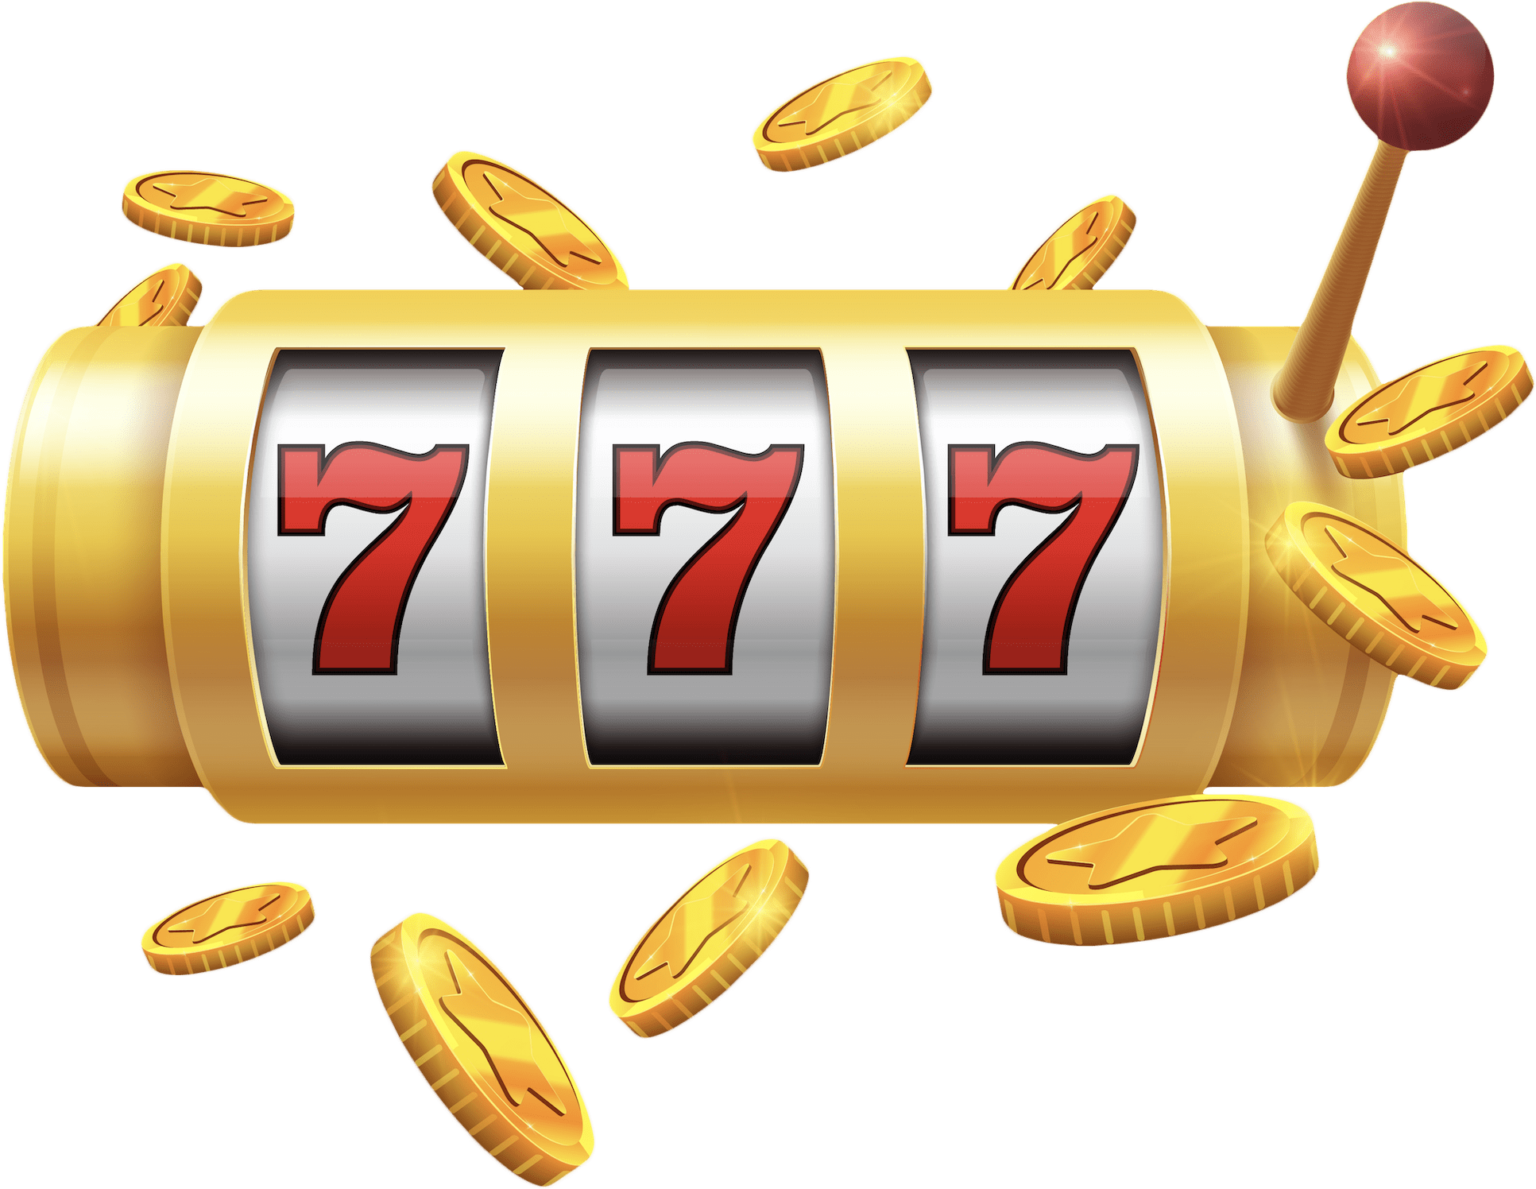 free online lottery slots for real money